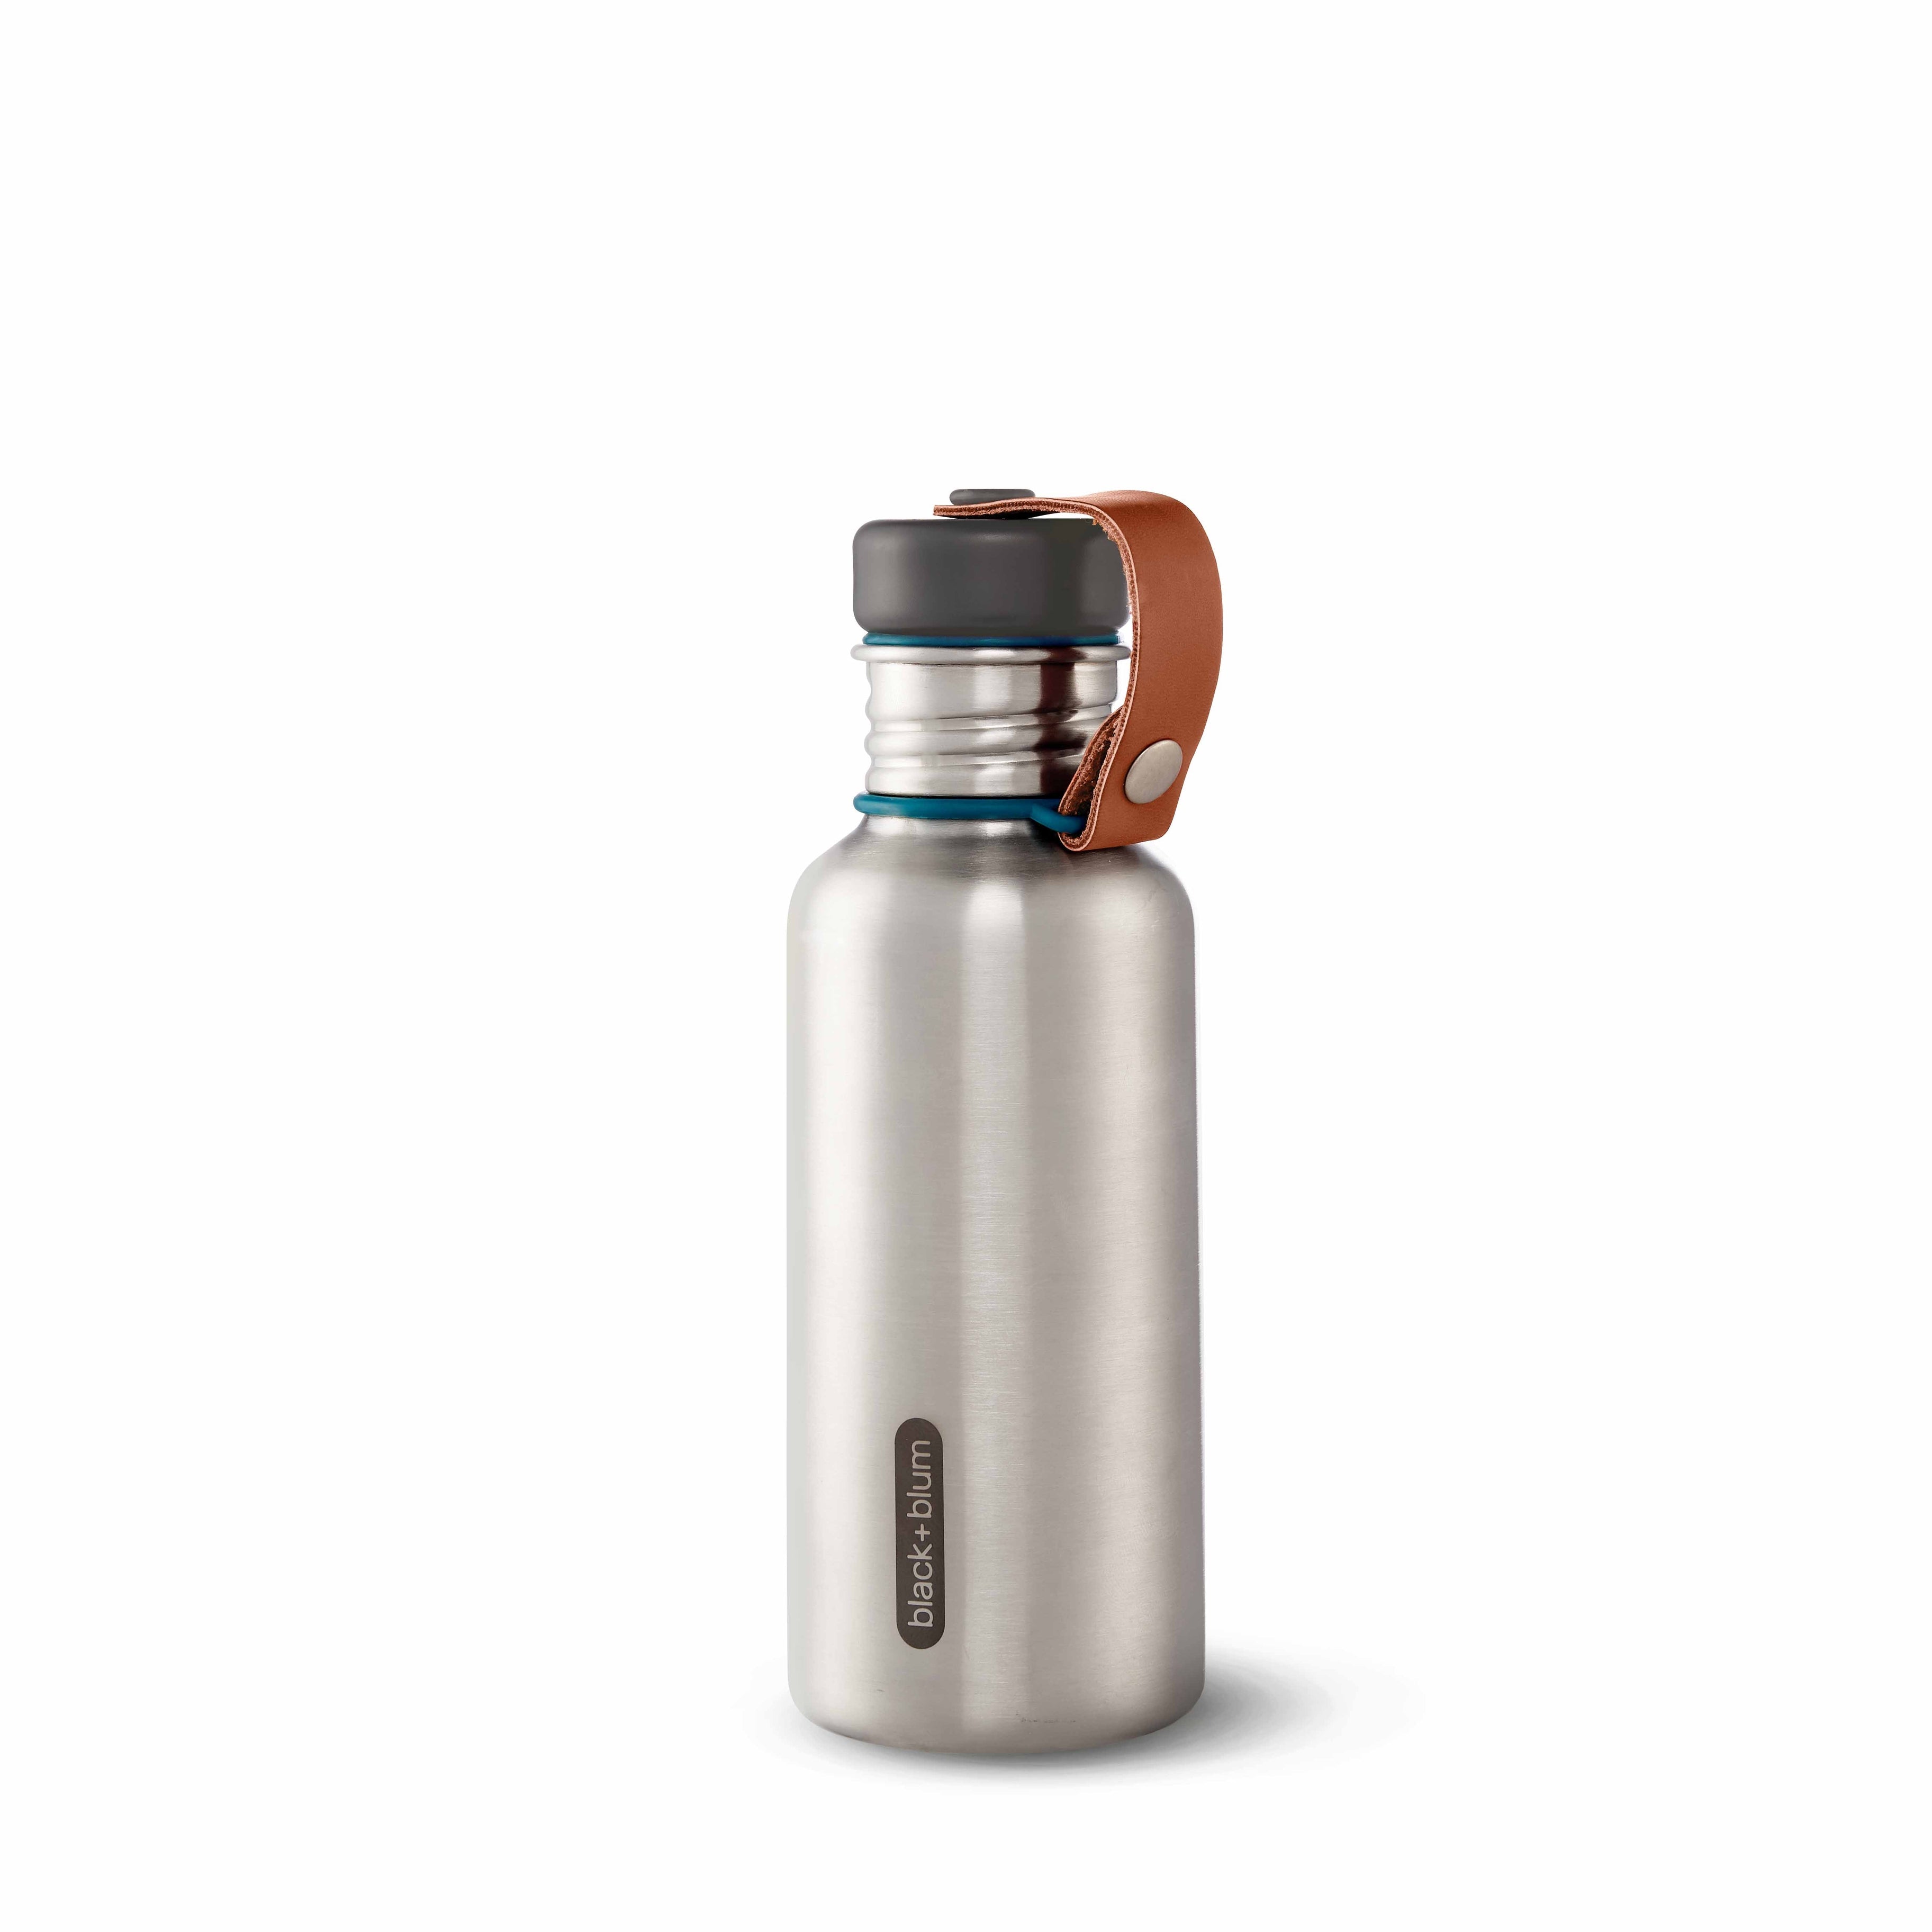 Black + Blum | Kid Sized Stainless Steel Insulated Water Bottle With Leather Strap, Water Bottle, Black + Blum, Defiance Outdoor Gear Co.